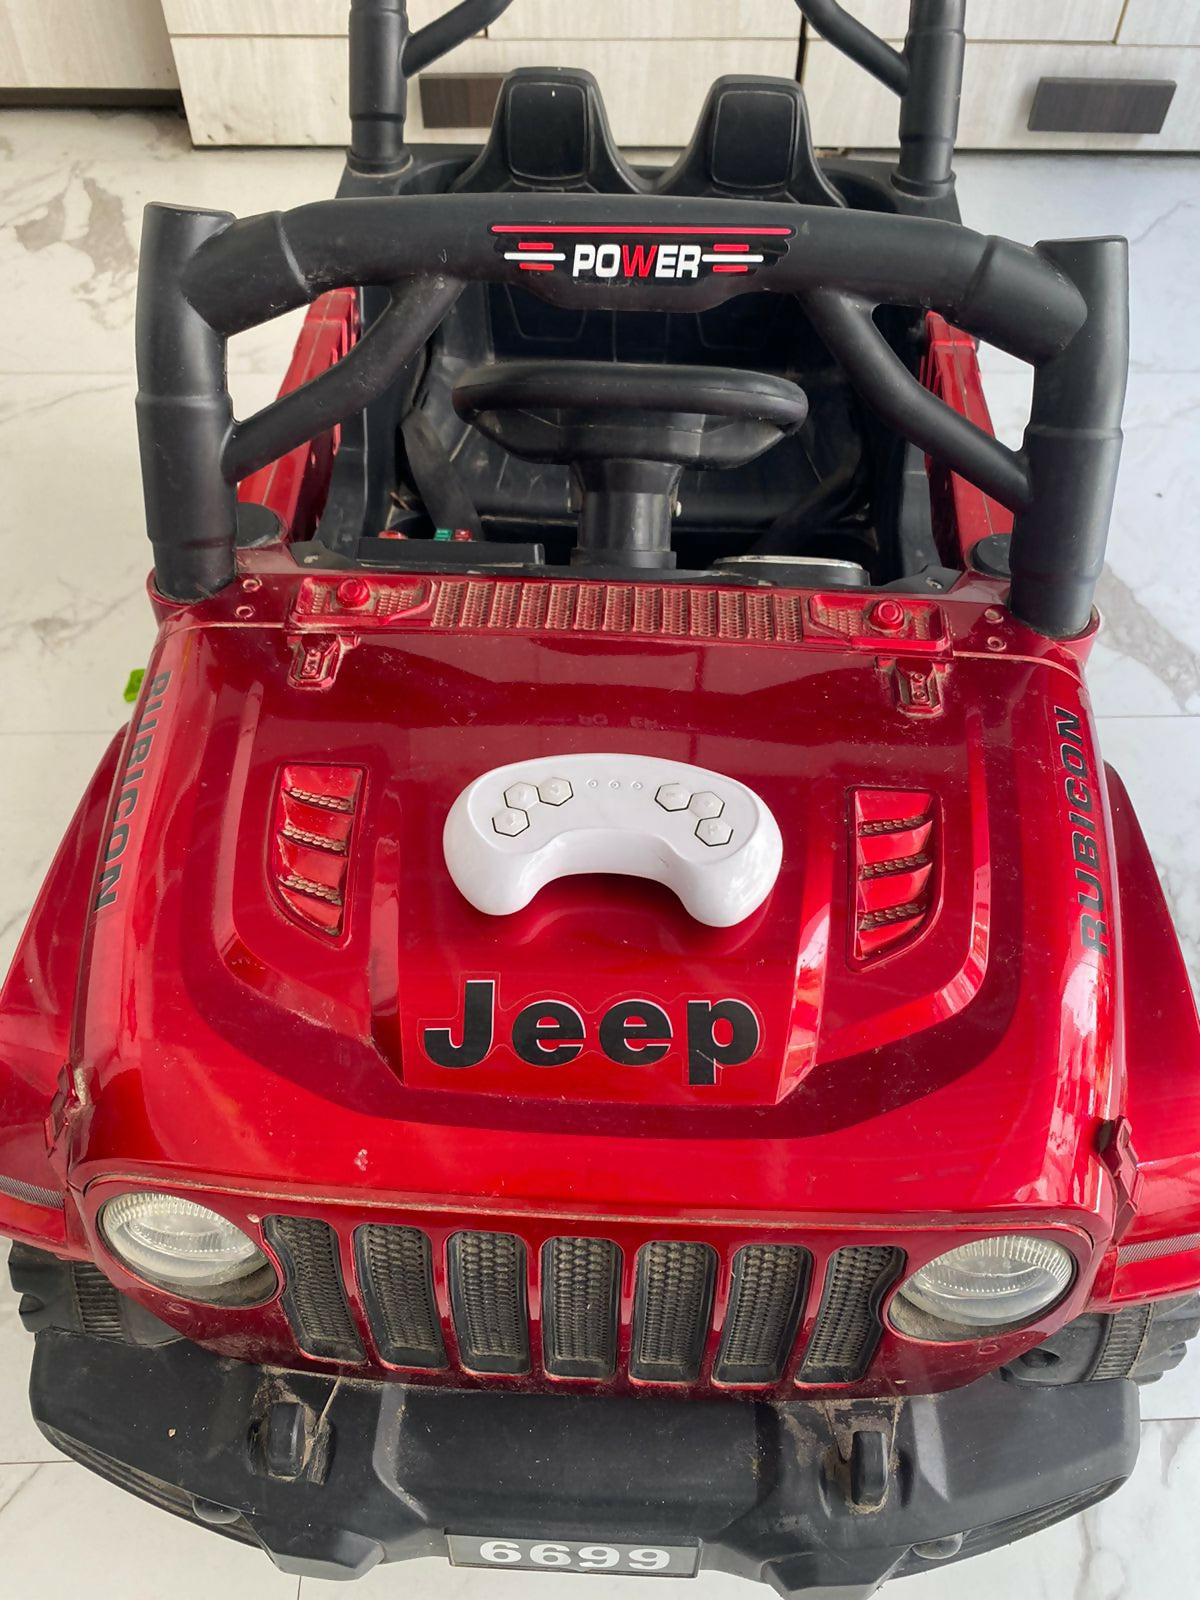 Experience the thrill of off-road adventures with the Rubicon Jeep for Kids, featuring realistic design, all-terrain wheels, and parental remote control for safe and exciting play.